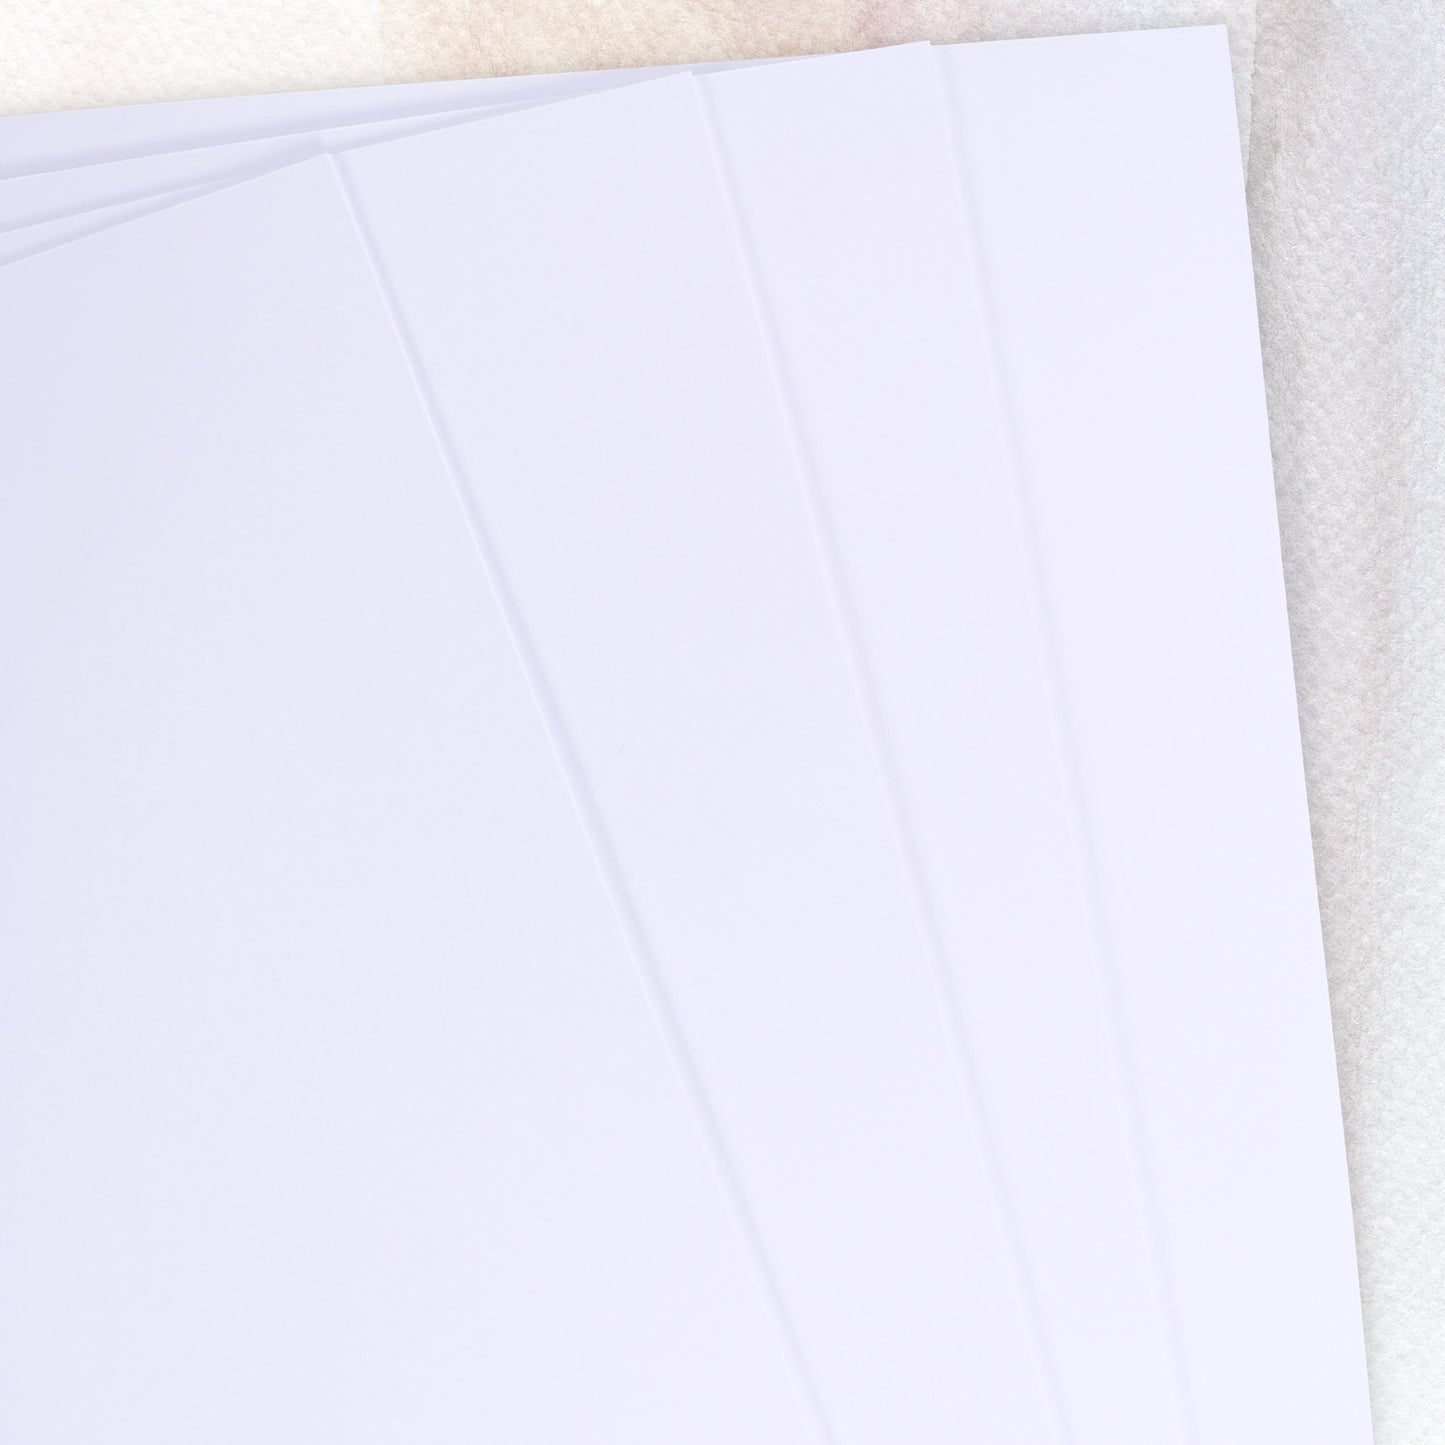 Large A2 White Card 10 Sheets 180gsm Card Pack